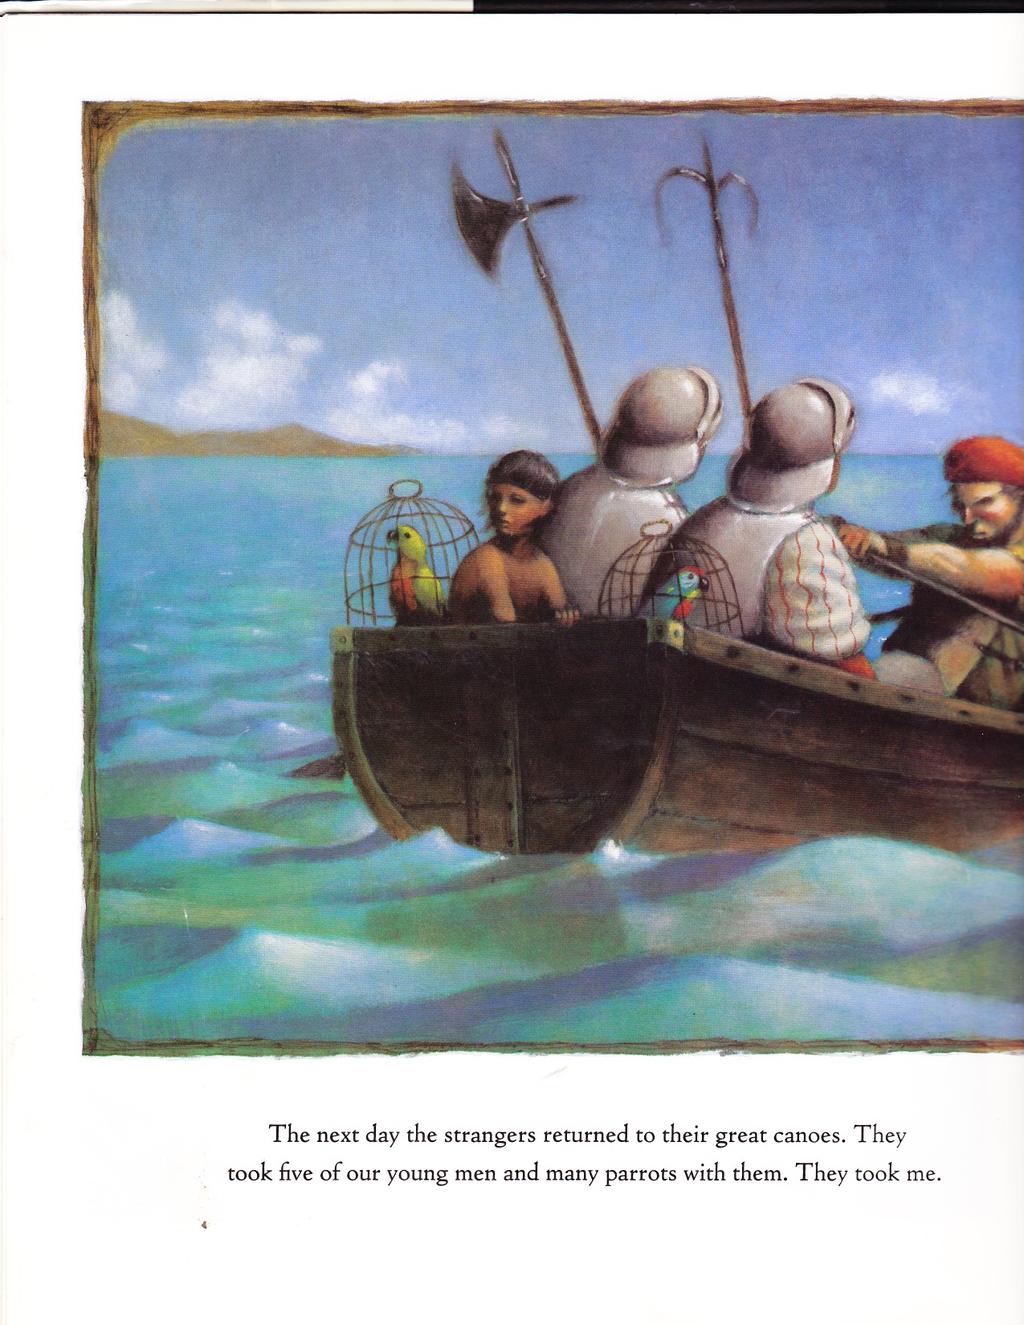 1' i tu t" "*'n*.j' c The next day the srangcrs returncd to their great canoes.